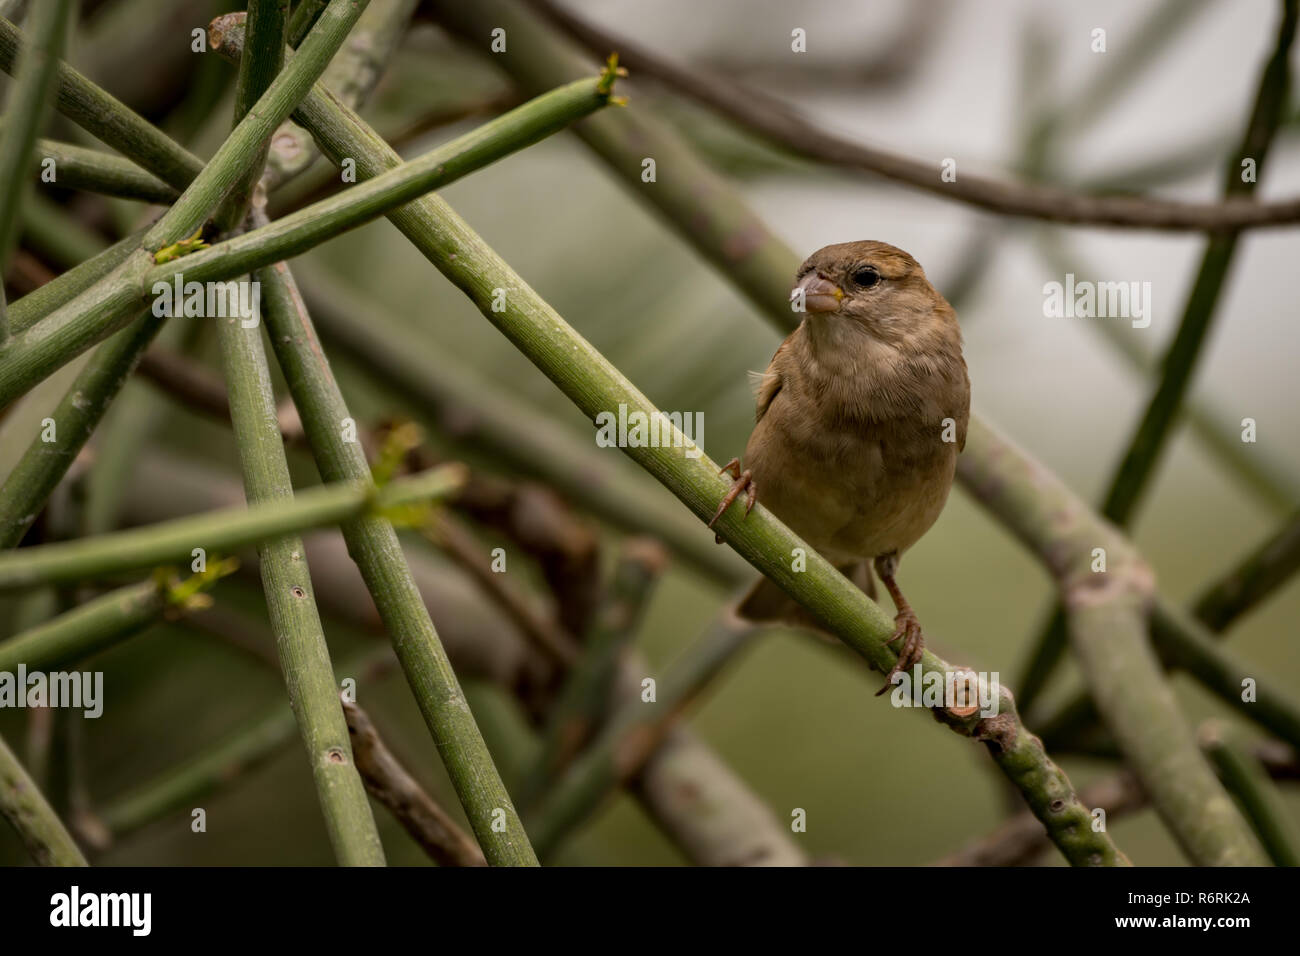 Female house sparrow facing camera on branch Stock Photo